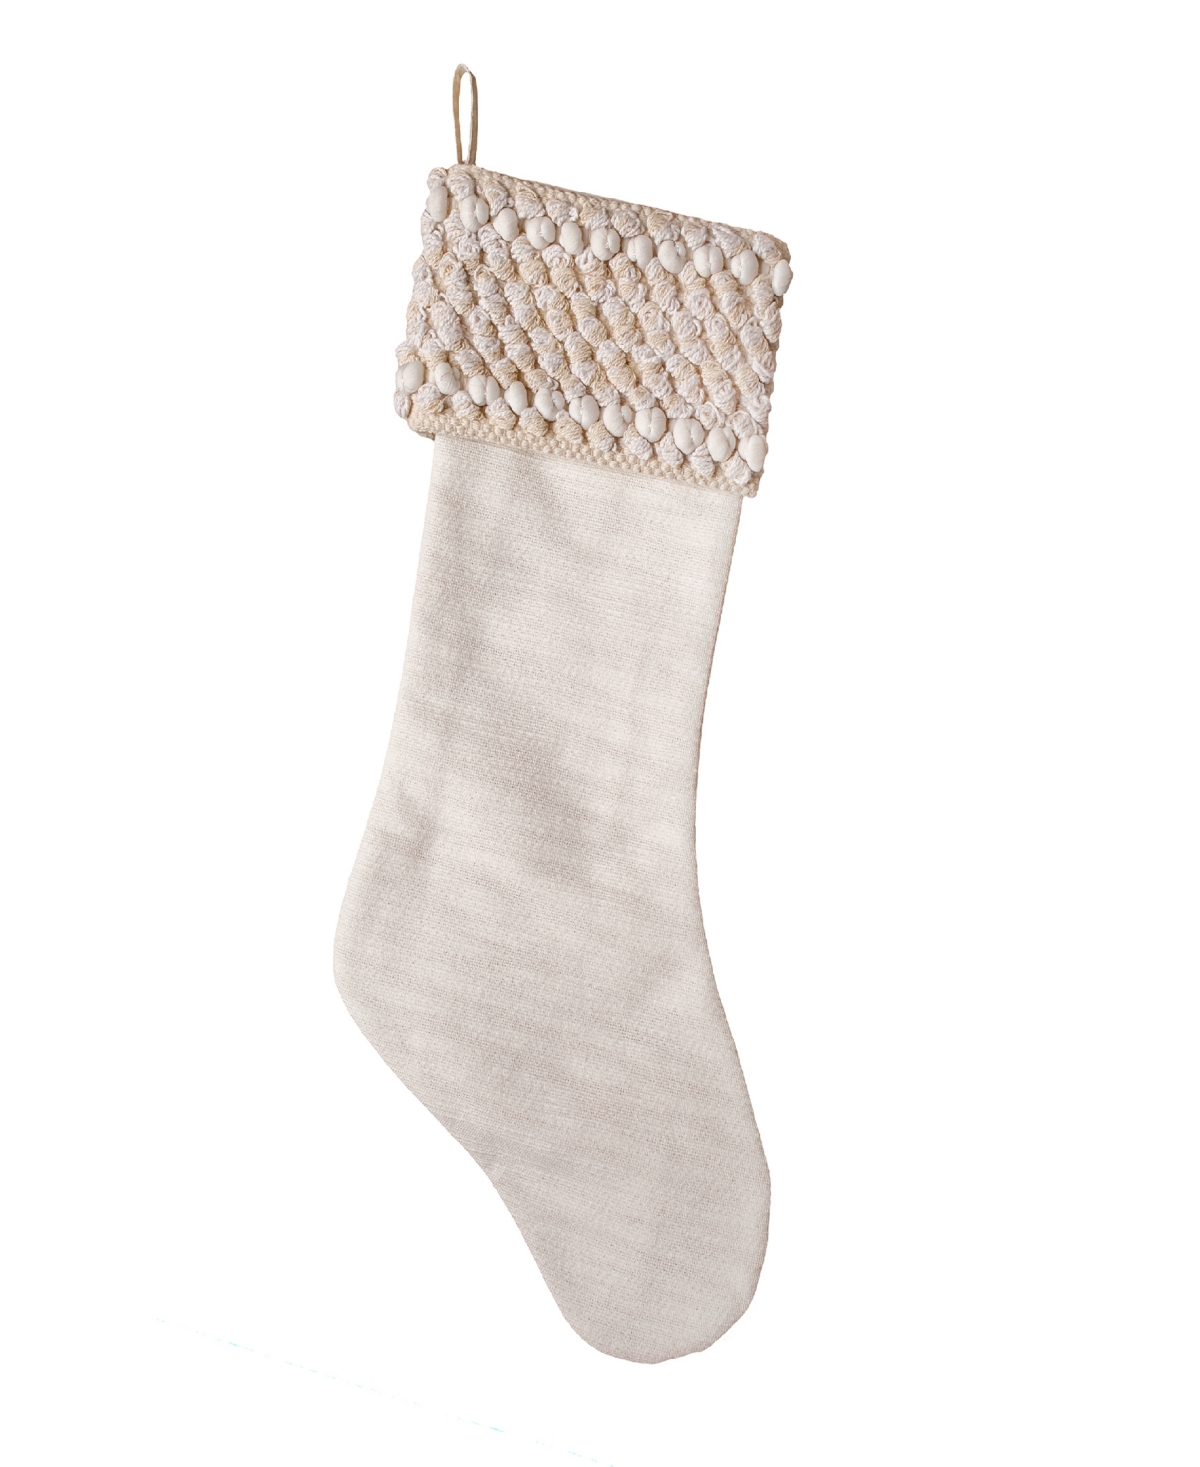 National Tree Company 20" Hgtv Home Collection Textured Cuff Stocking In Ivory